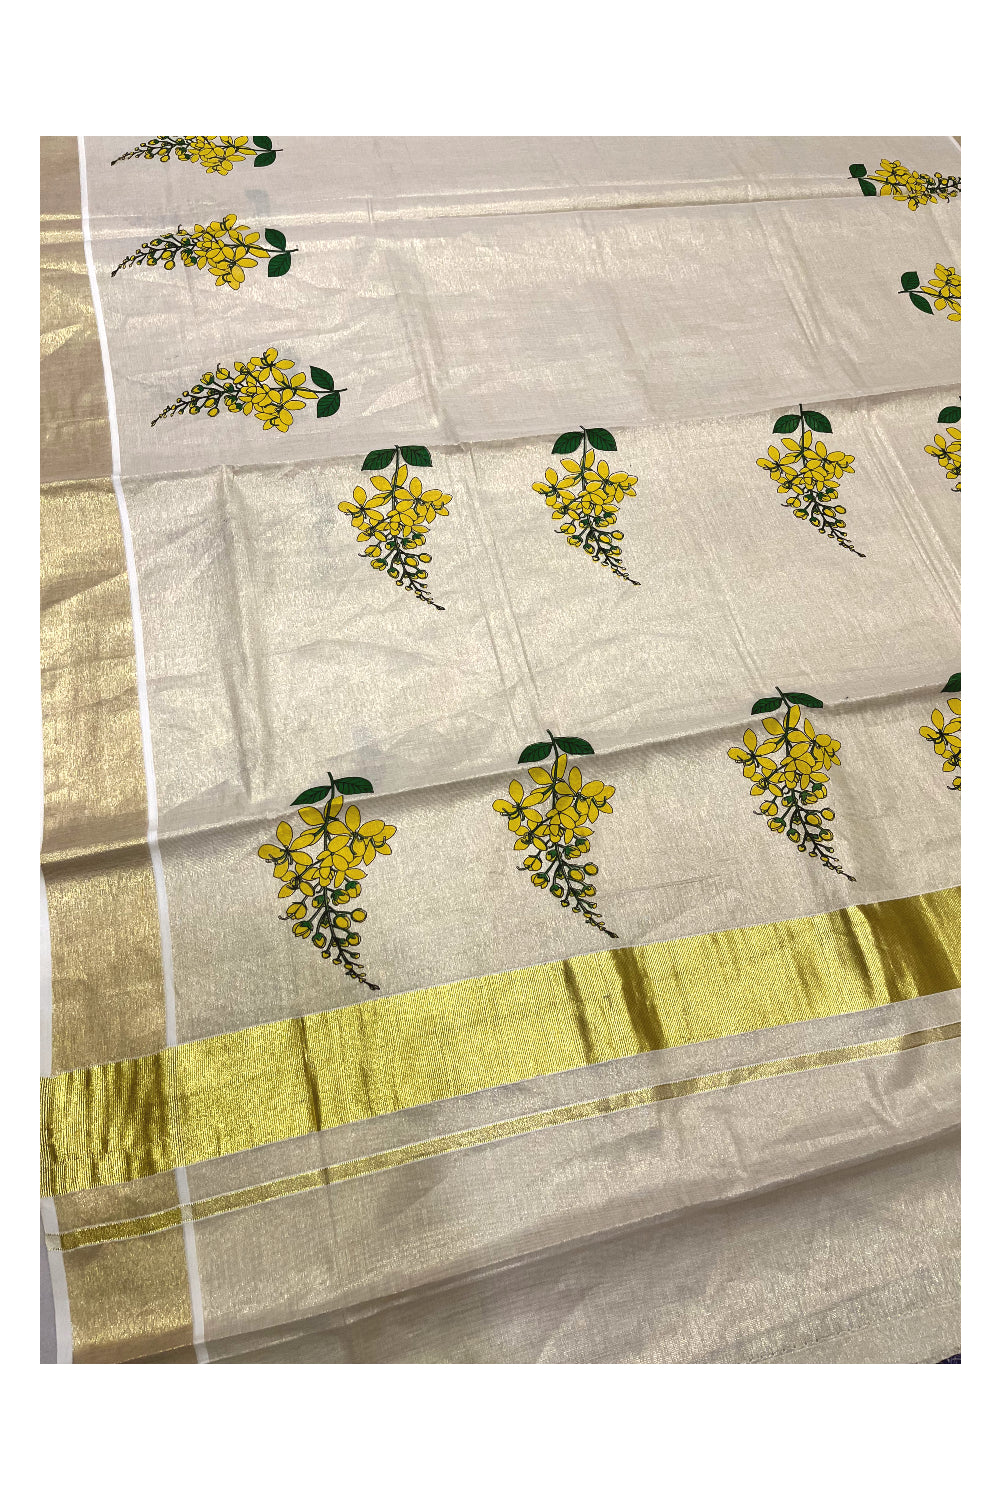 Kerala Tissue Kasavu Saree with Floral Prints on Body With Seperate Floral Printed Blouse